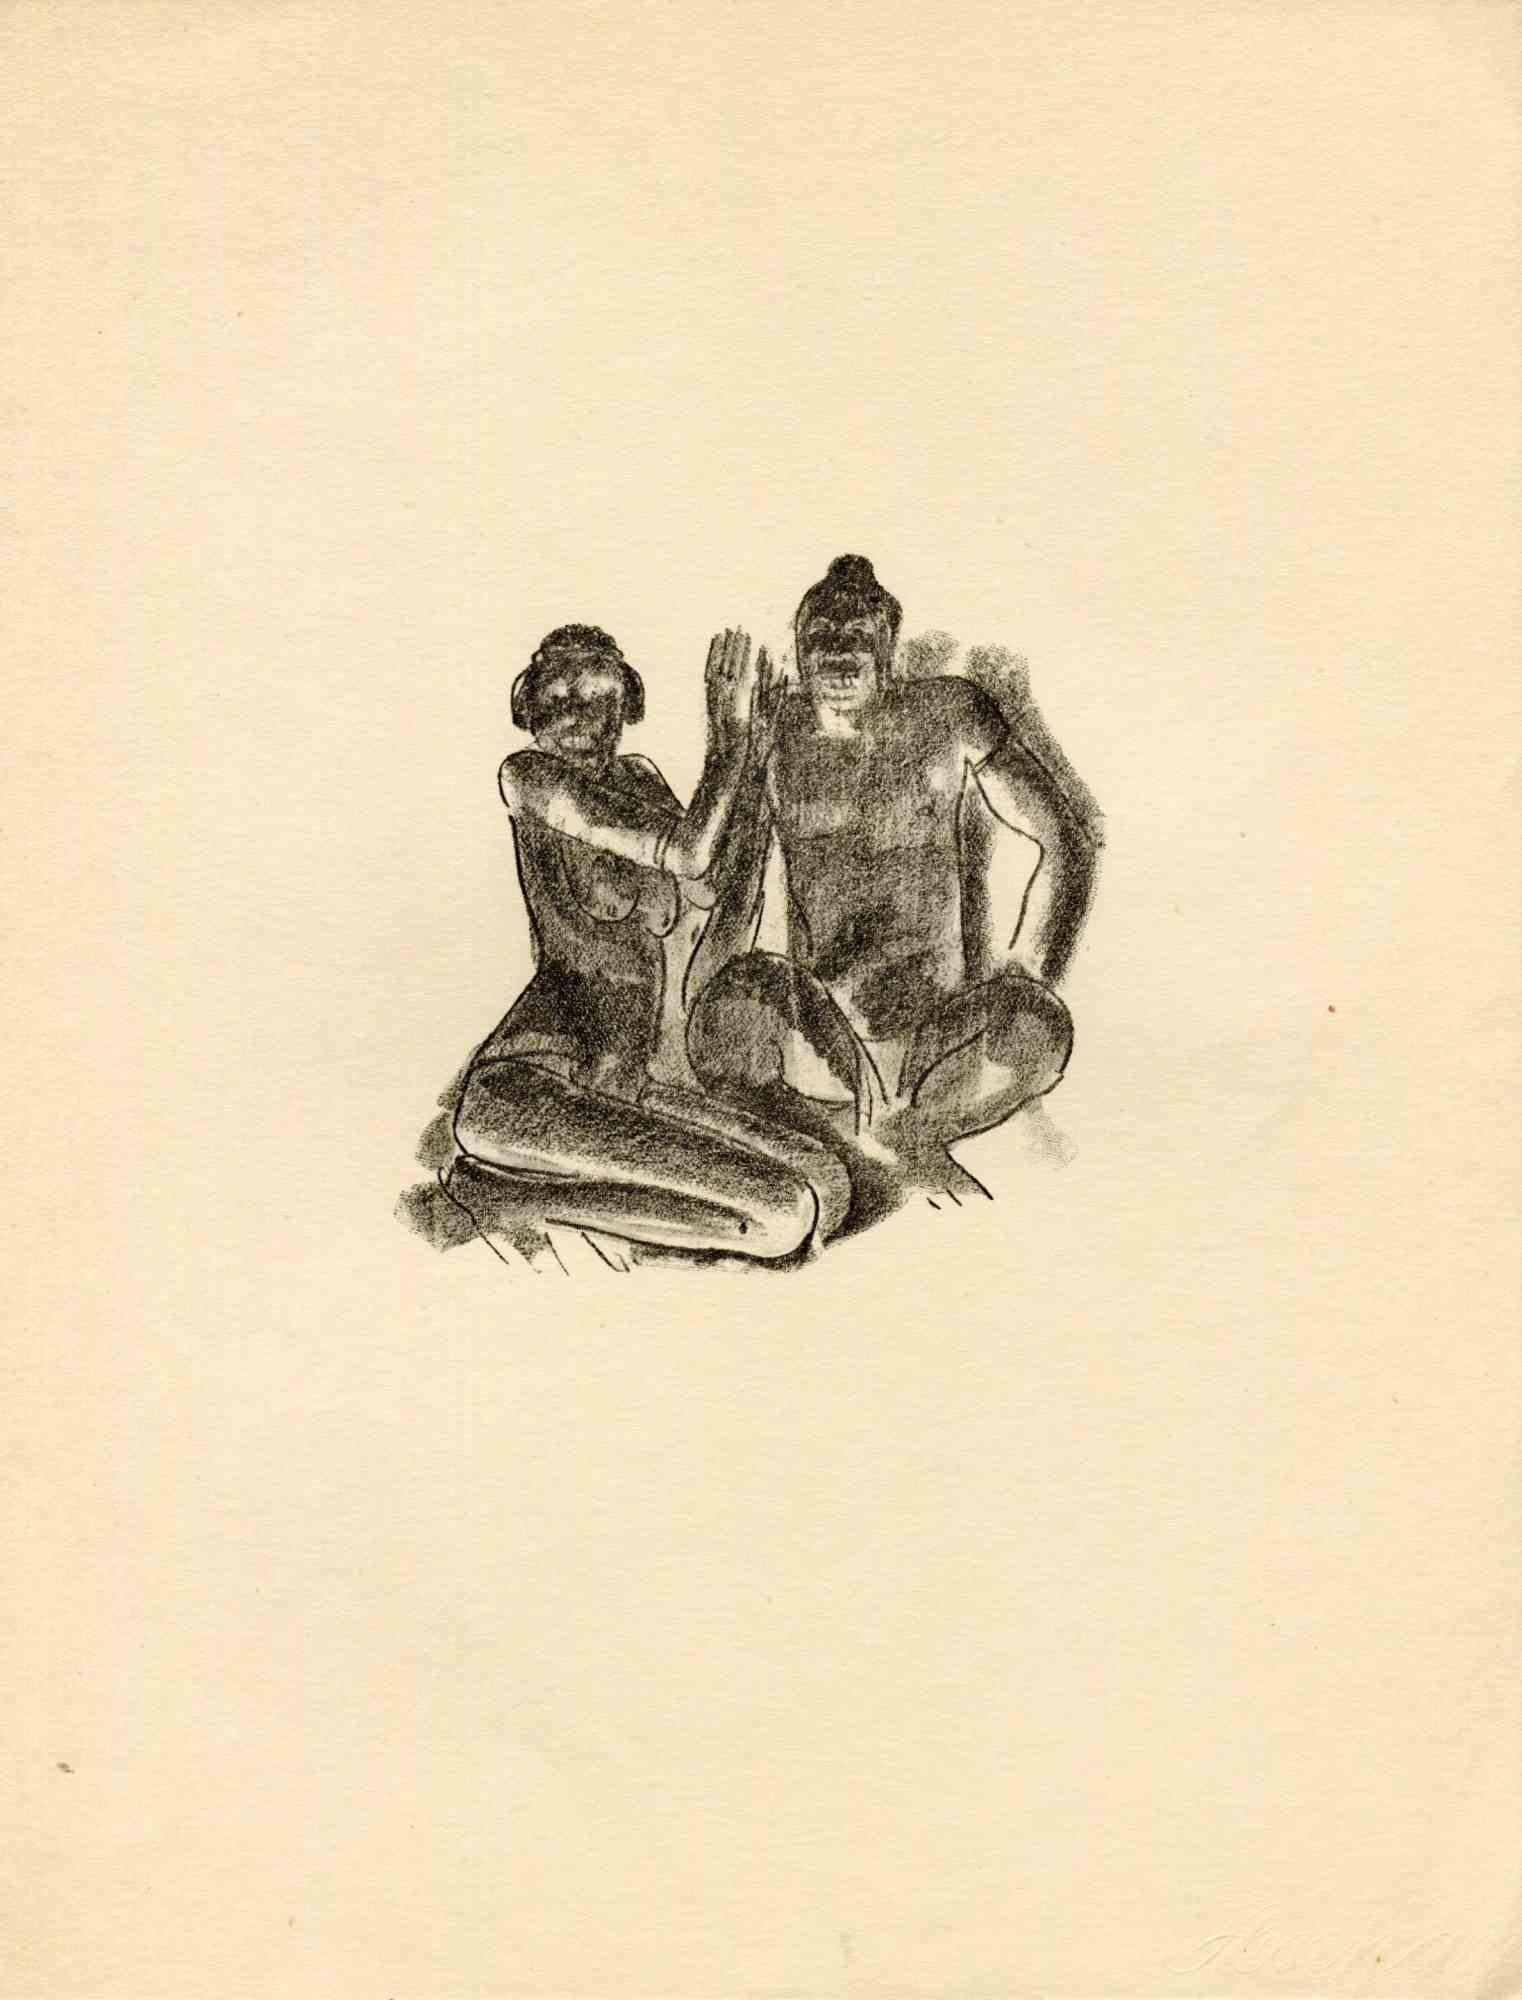 Tribal Men is an original lithograph realized in the early 1930s by Emmanuel Gondouin, (Versailles, 1883 - Parigi, 1934) 
 
The artwork is depicted through strong strokes and is part of a series entitled "Africa". 